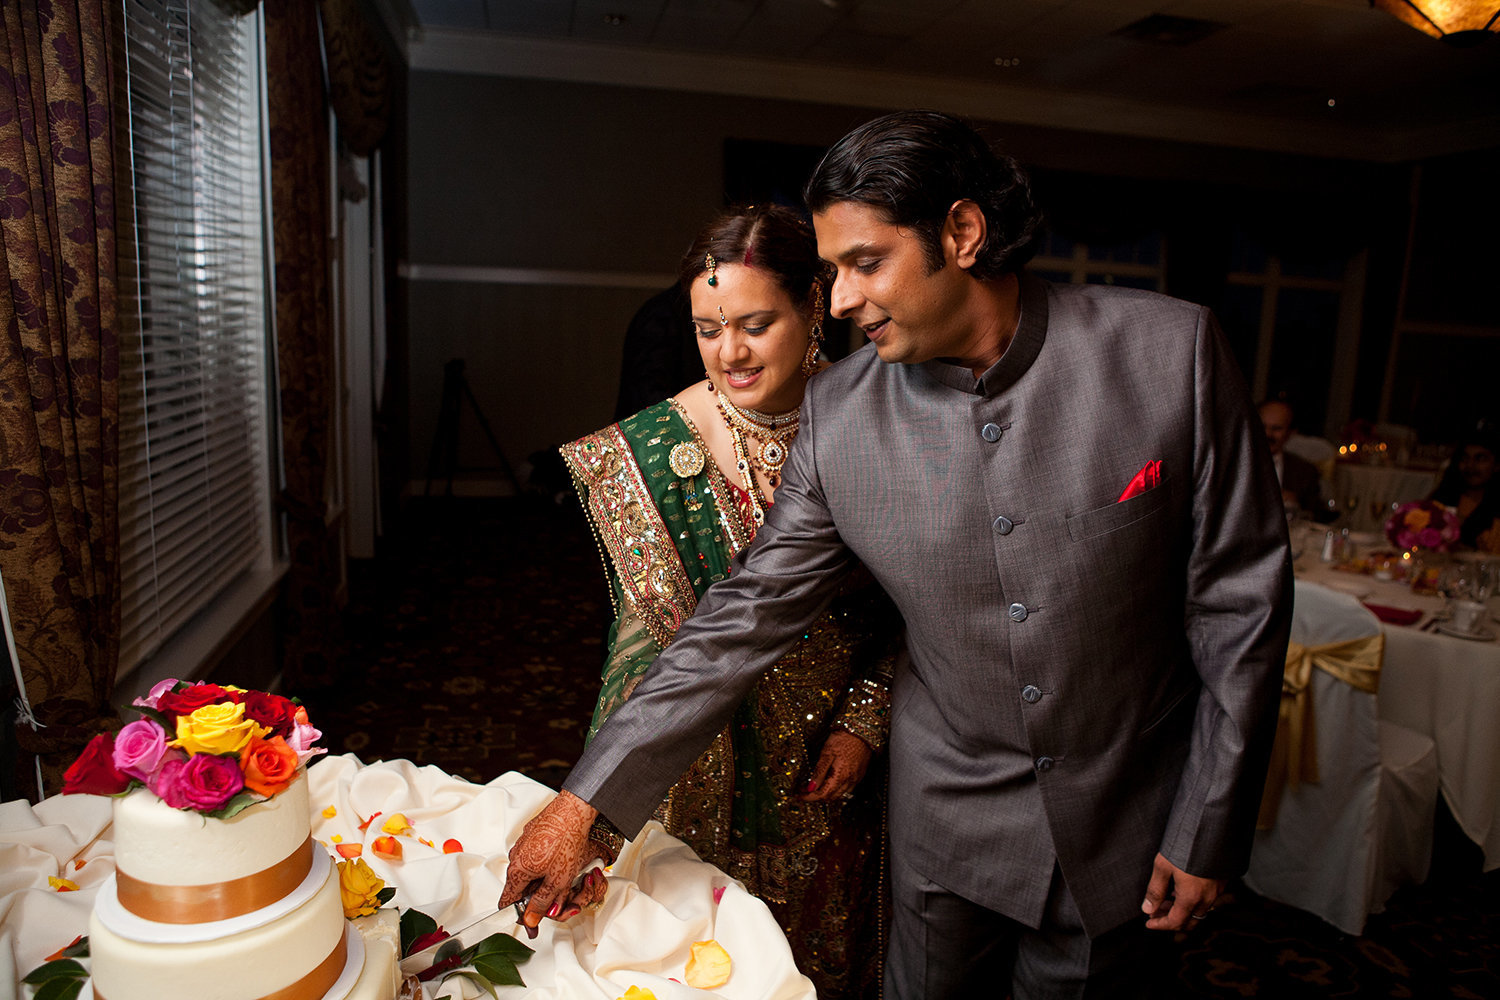 Indian bride and groom cut their cake